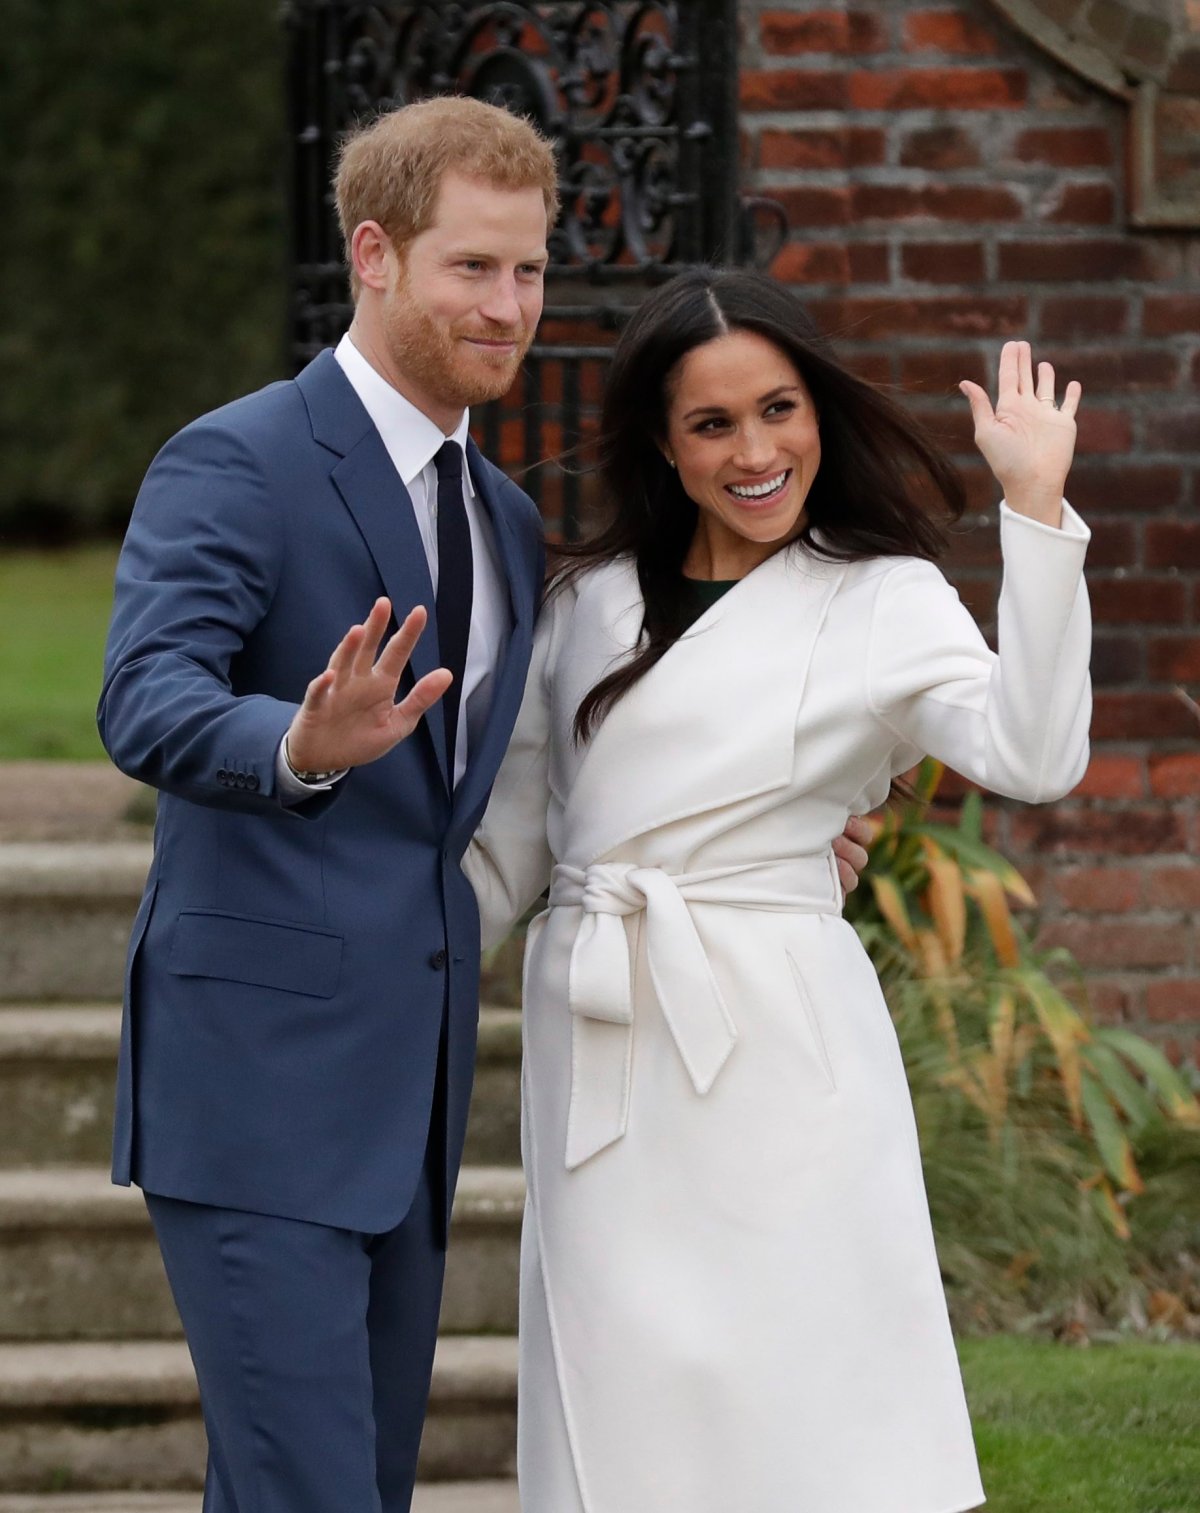 Prince Harry Meghan Markle Appear Together For First Time As Engaged Couple National 